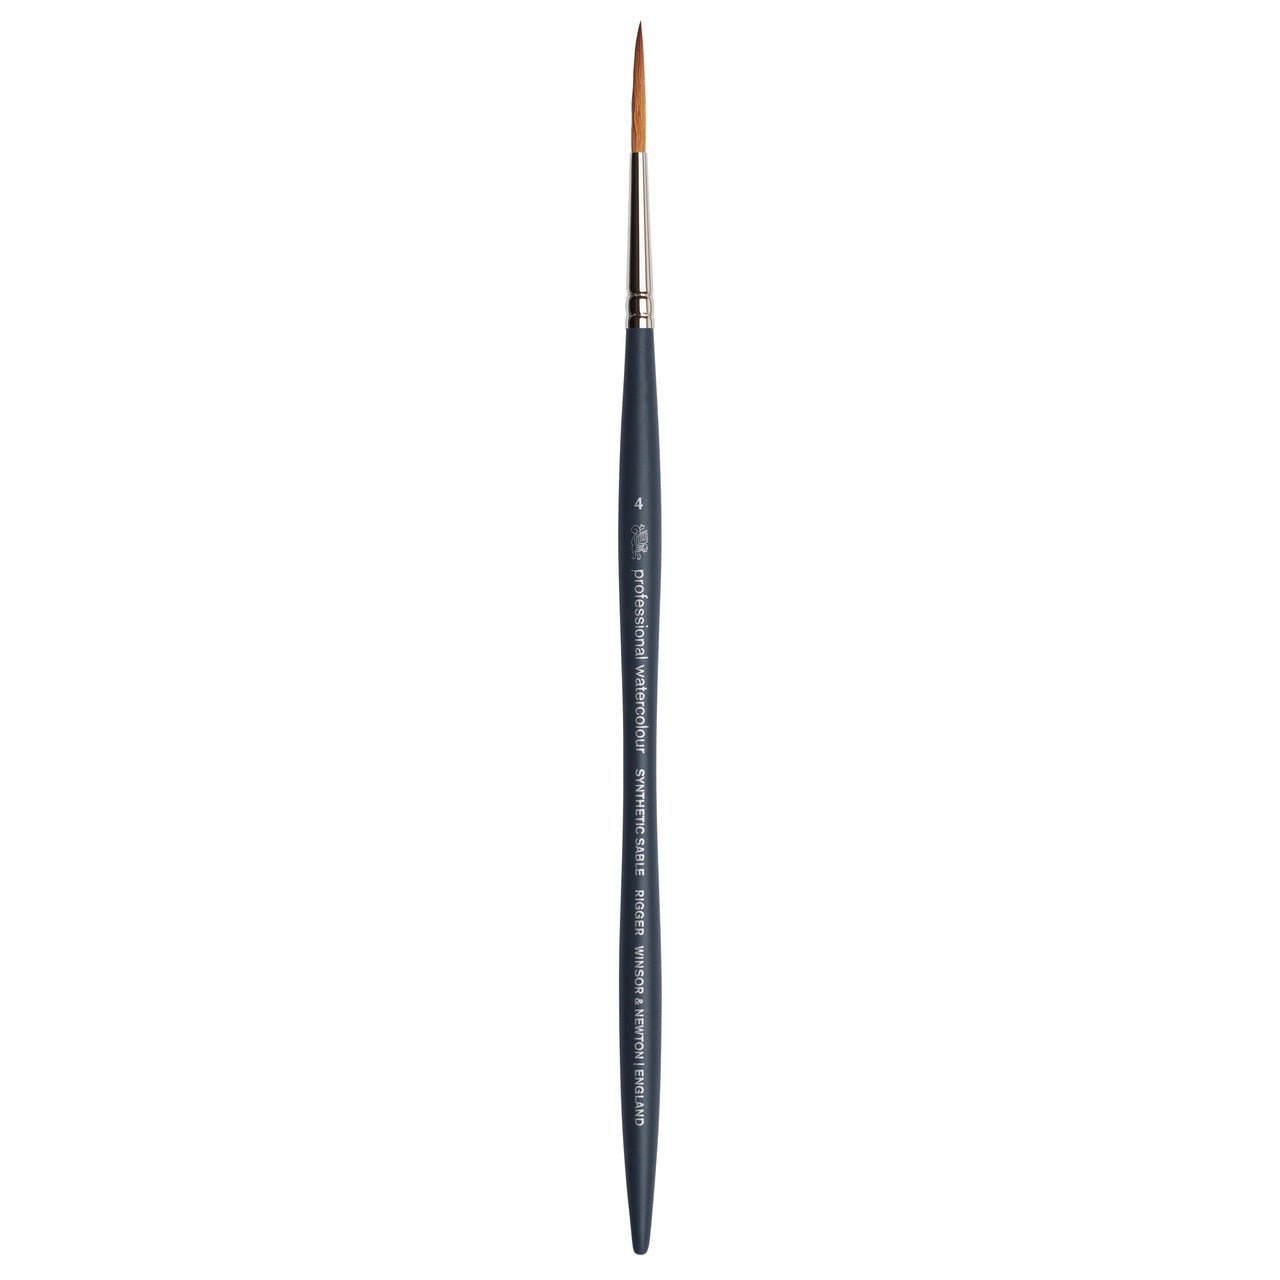 Winsor & Newton Professional Watercolor Synthetic Sable Brush - Rigger 4 - merriartist.com